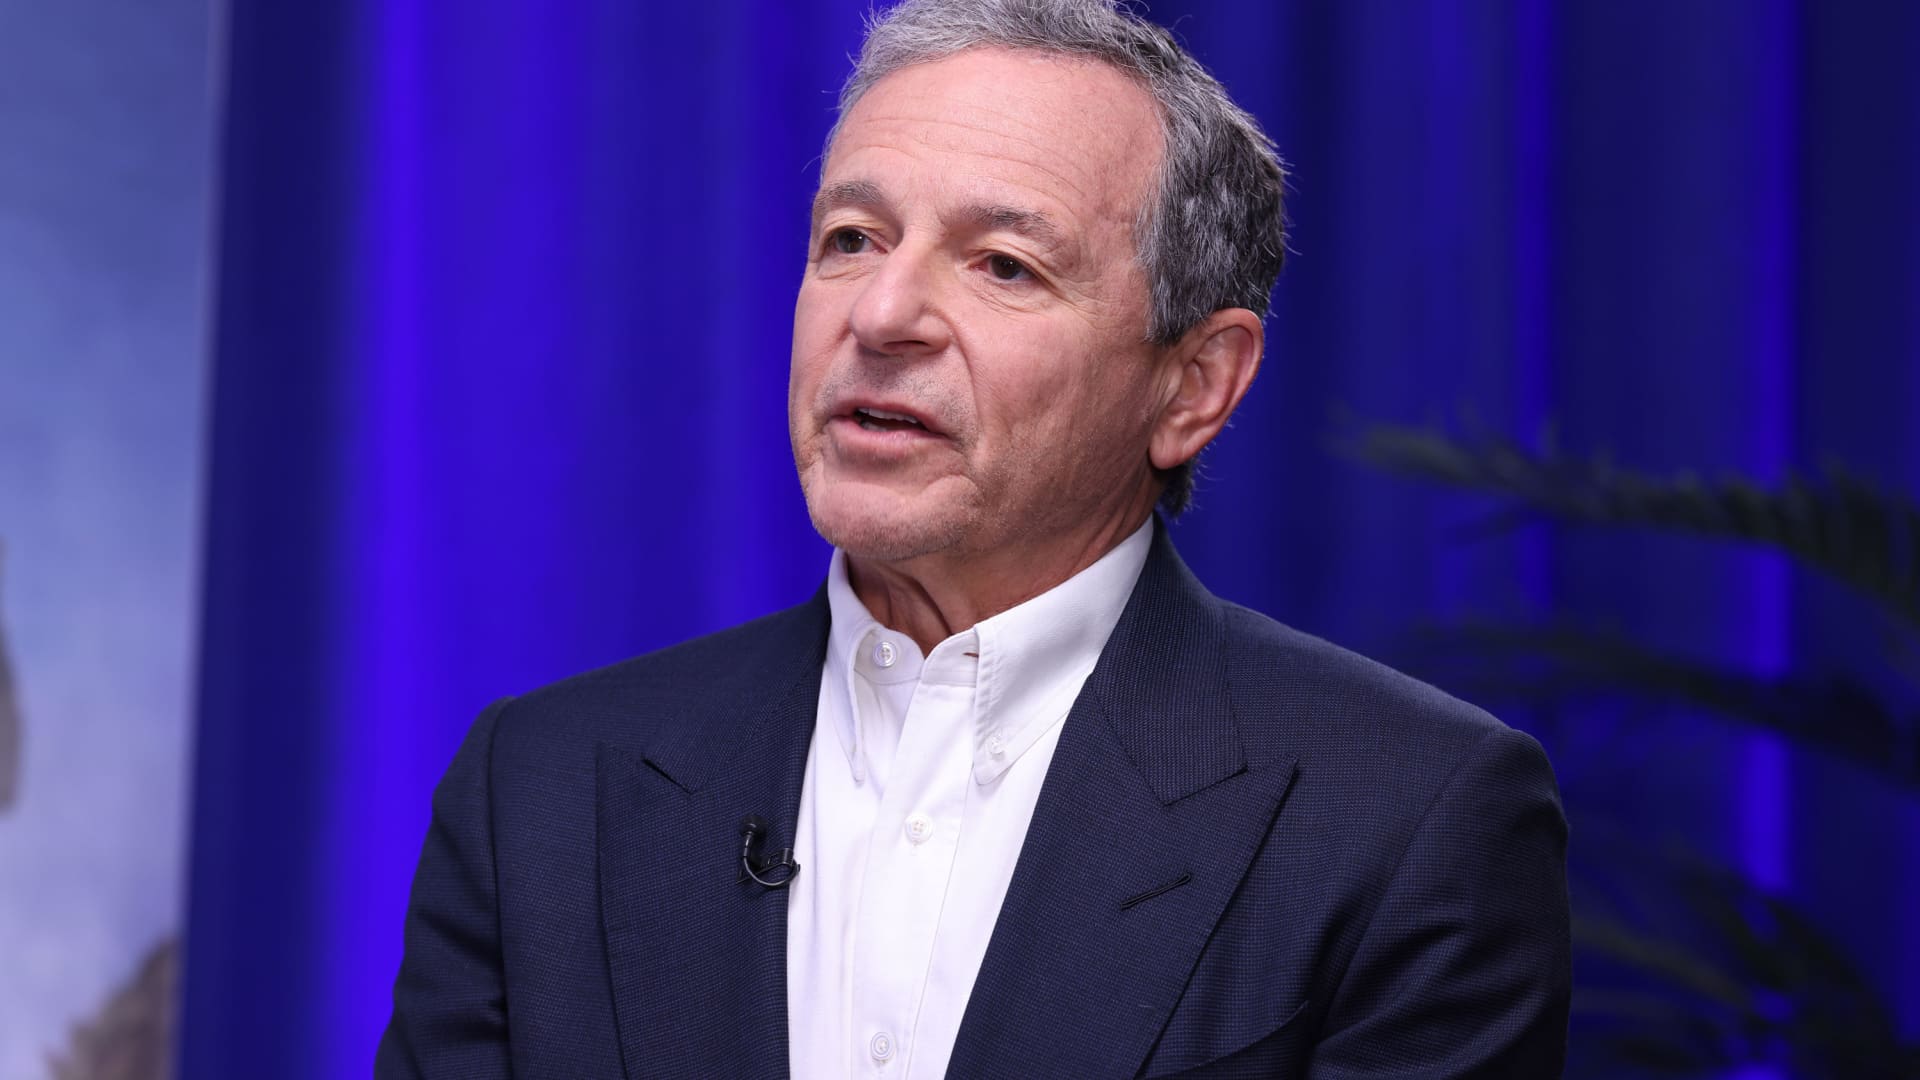 Disney could soon sell its TV assets as Iger says business 'may not be core' to the company